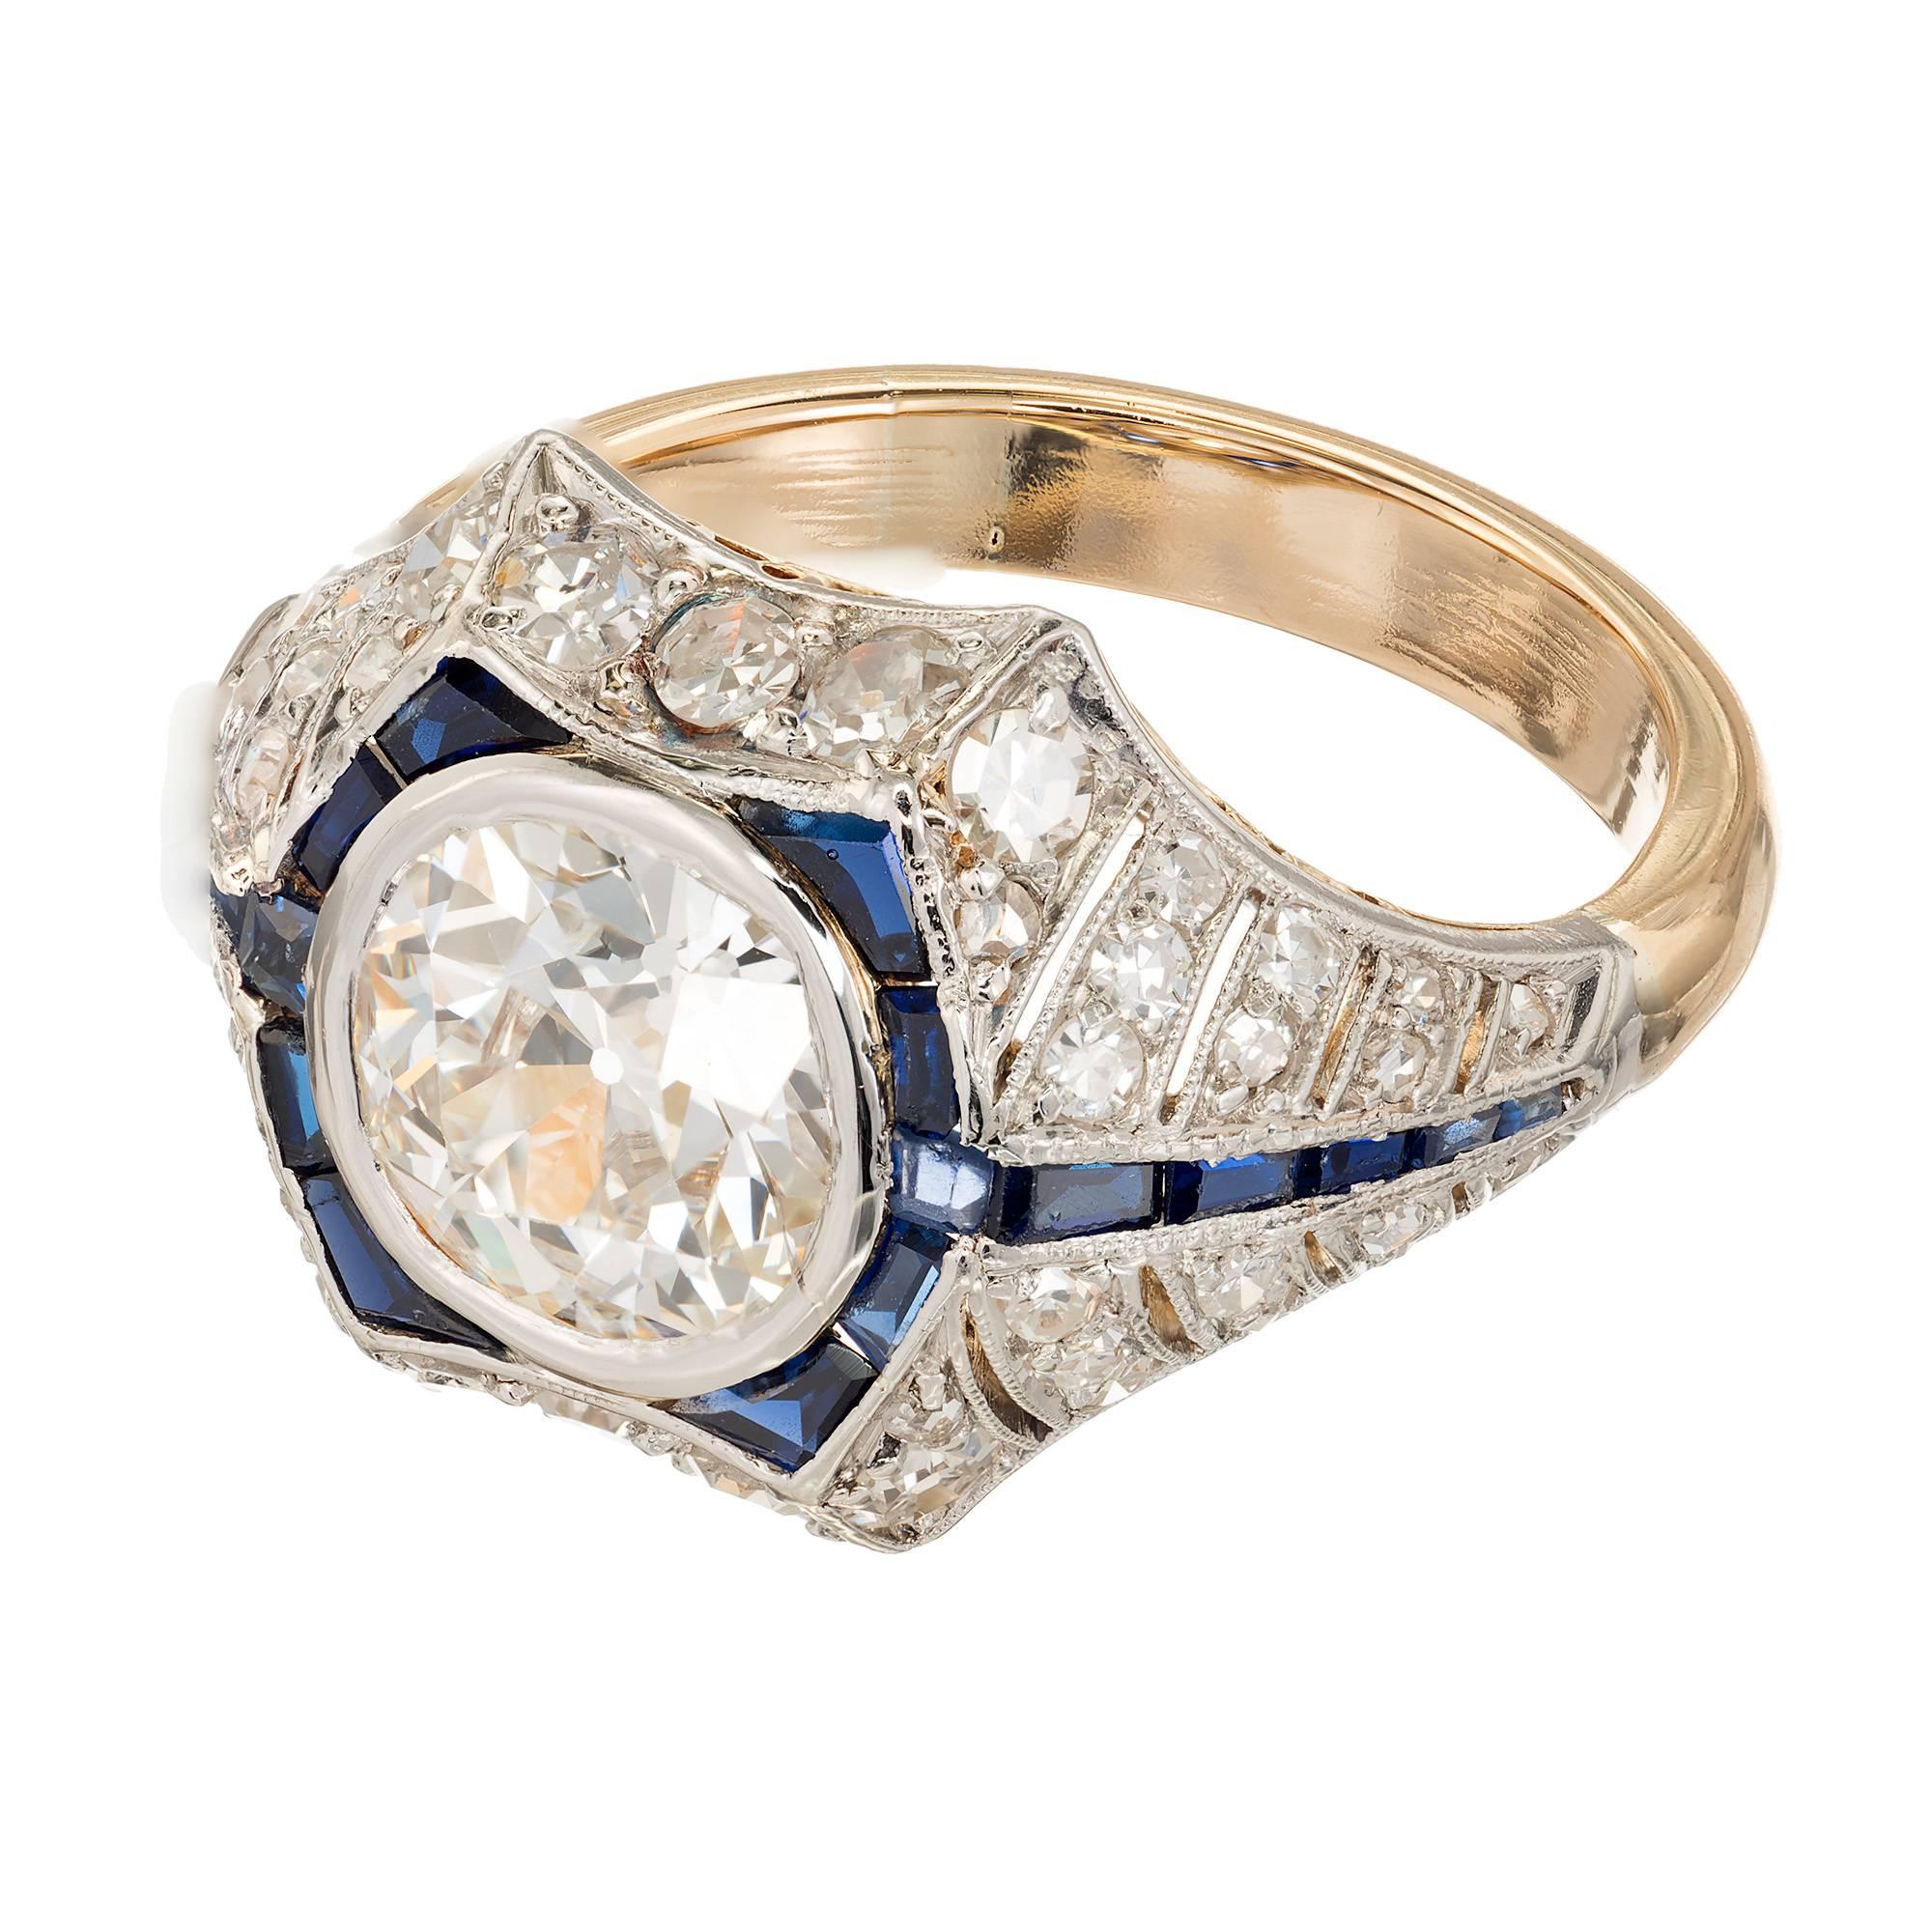 Diamond and sapphire 18k yellow gold engagement ring with handmade Platinum top set with calibre Sapphires and round diamonds. Certified and graded by the EGL. 

1 EGL USA certified US53678502D Ideal old European cut 1.65ct diamond, H, SI1, Table